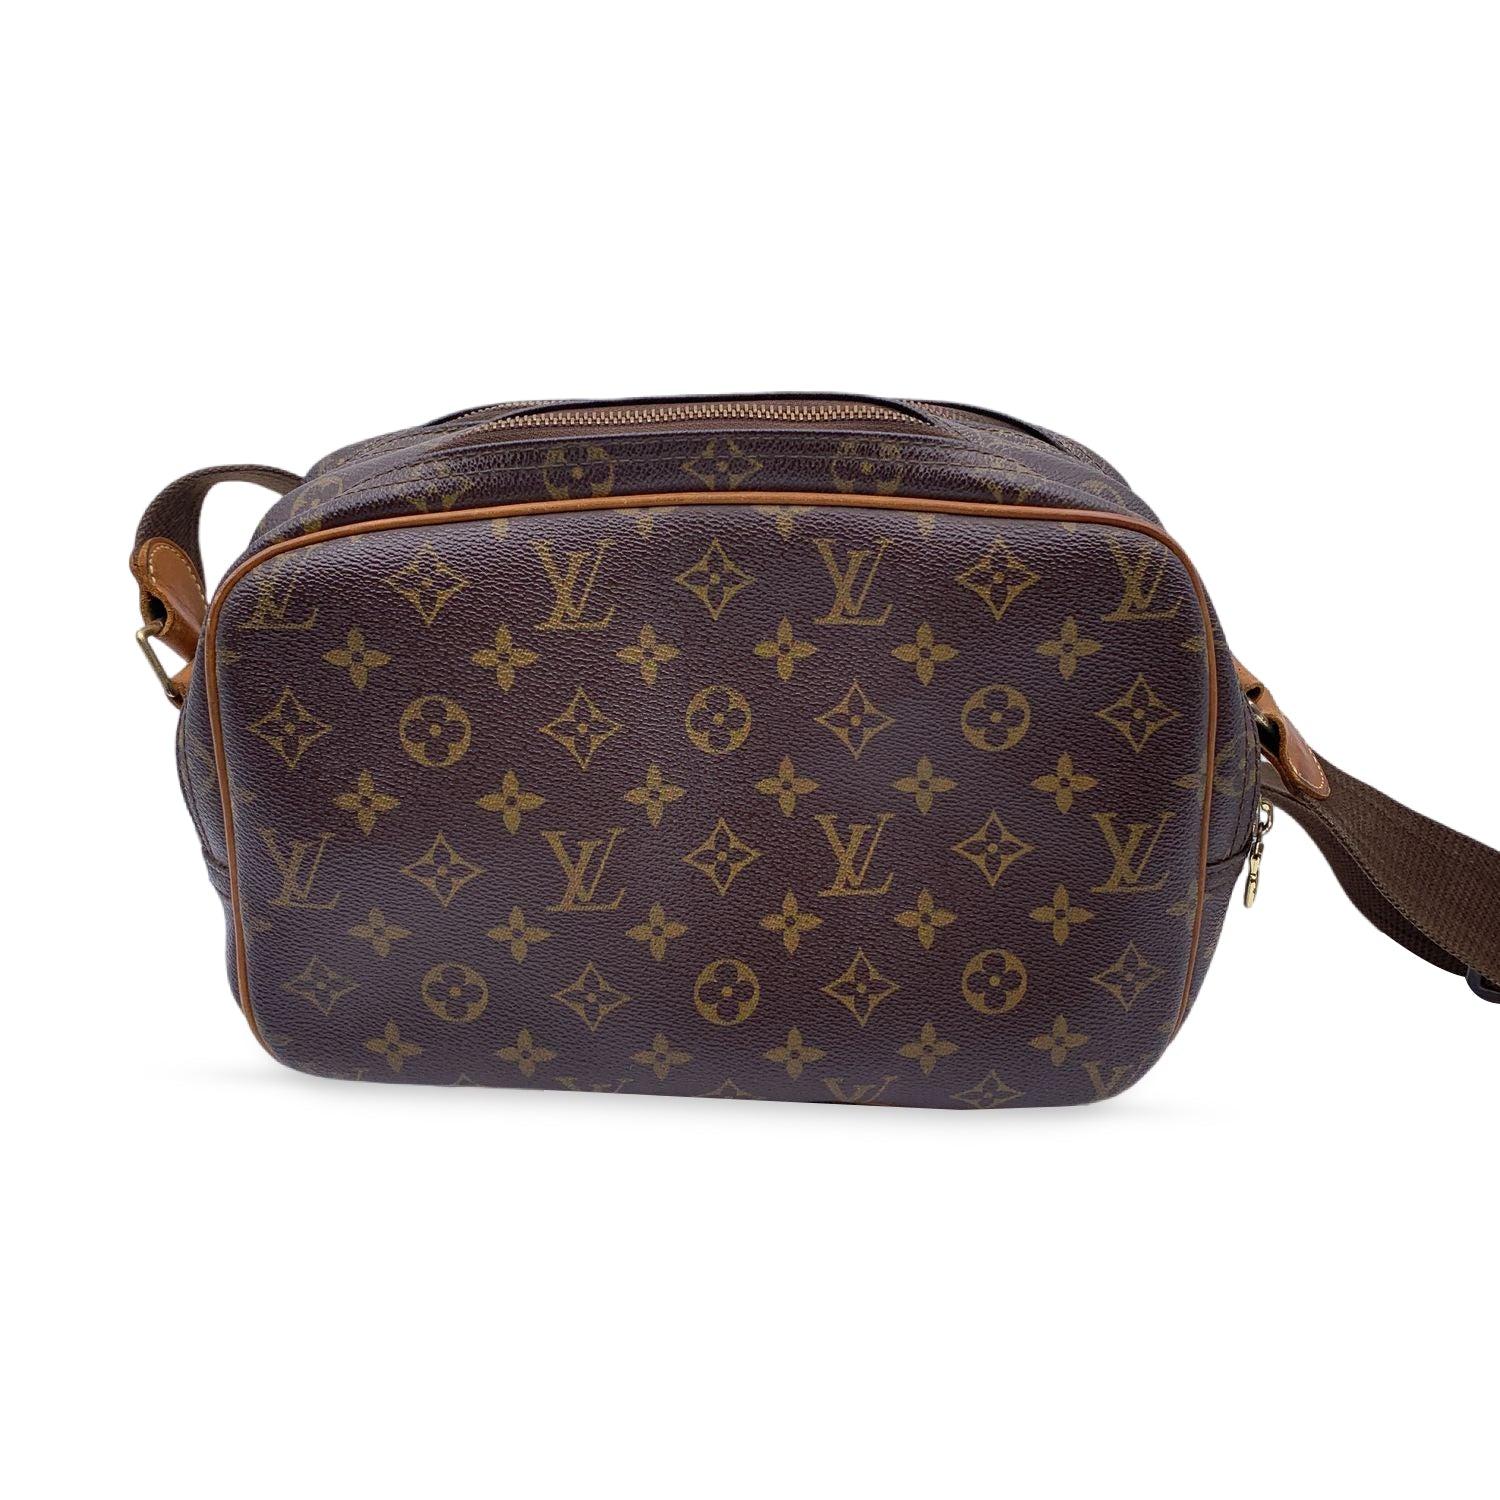 Louis Vuitton Monogram Reporter PM Canvas Messenger Bag M45254 In Good Condition For Sale In Rome, Rome